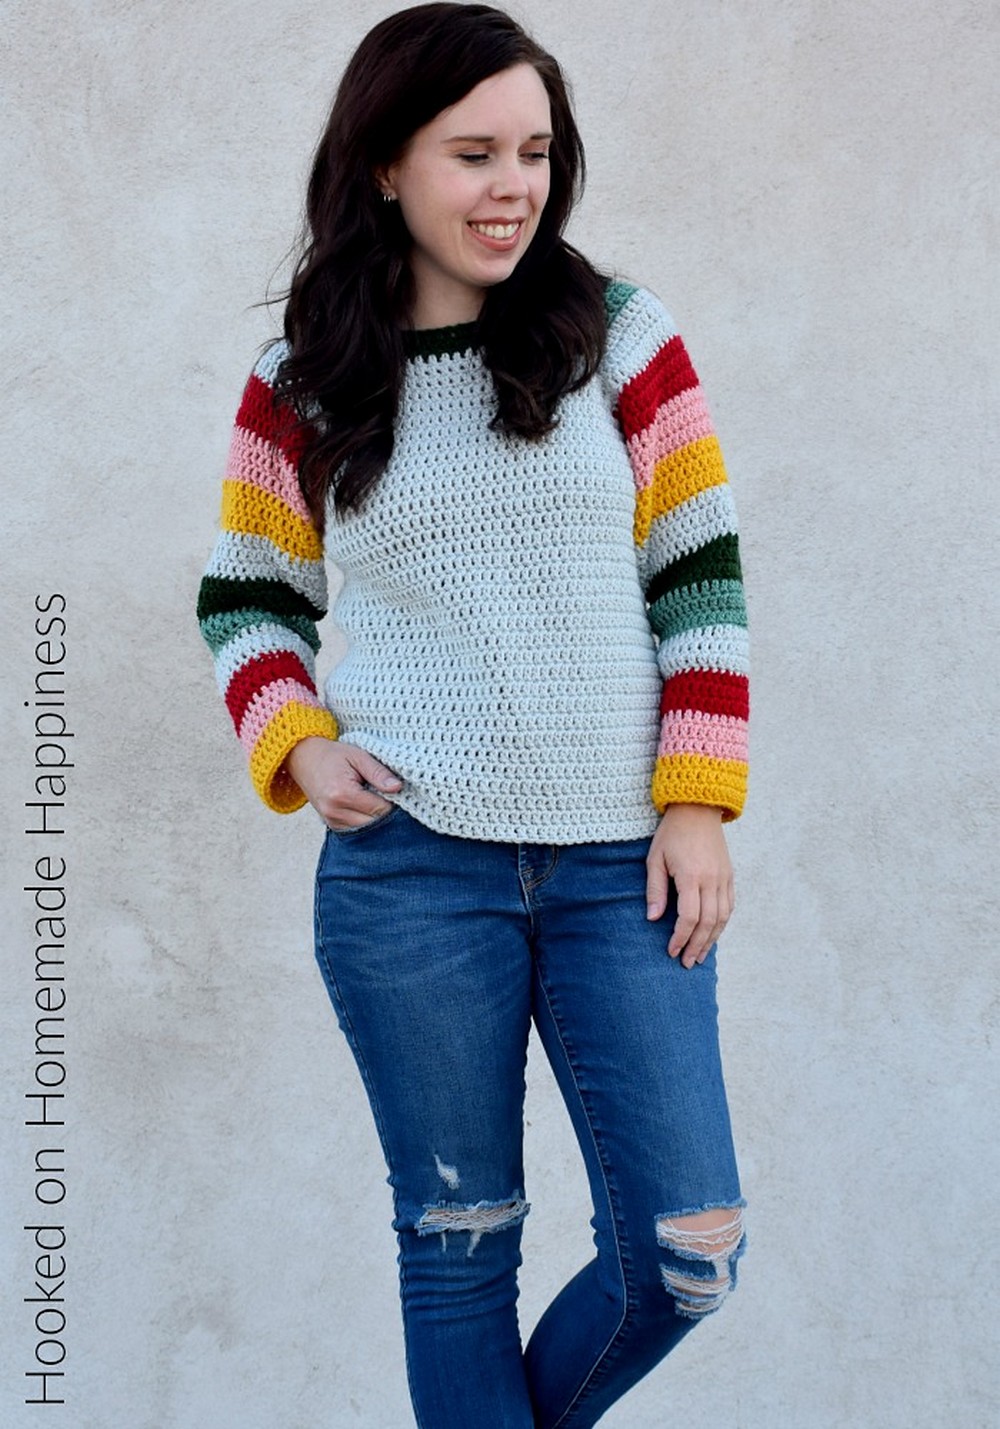 Crochet pattern for a mod Christmas sweater